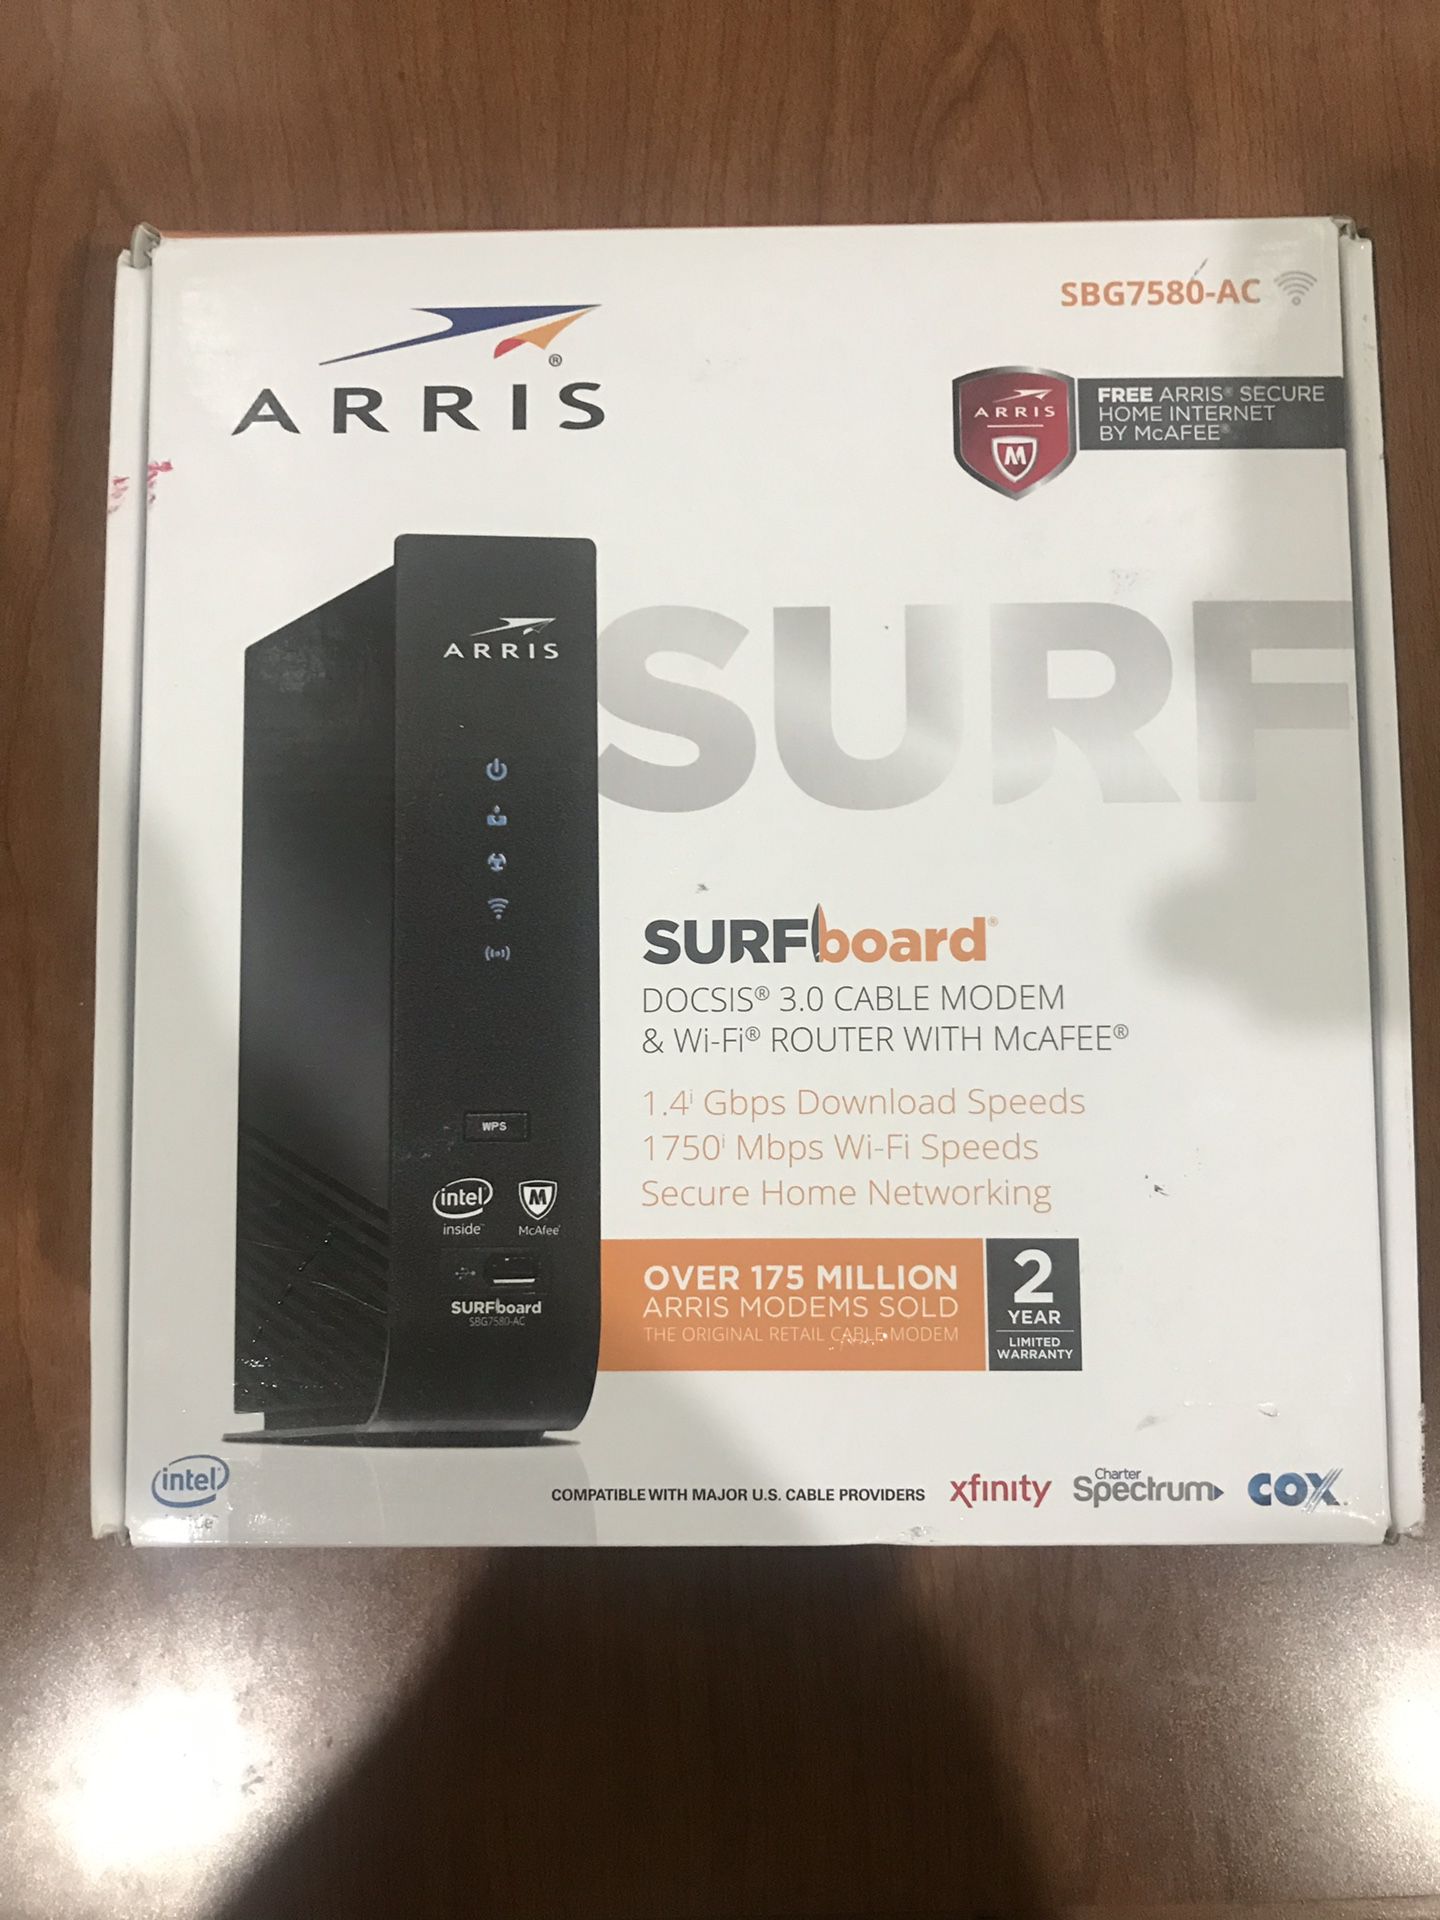 ARRIS Surfboard SBG7580-AC DOCSIS 3.0 cable modem & Wifi router with McAfee